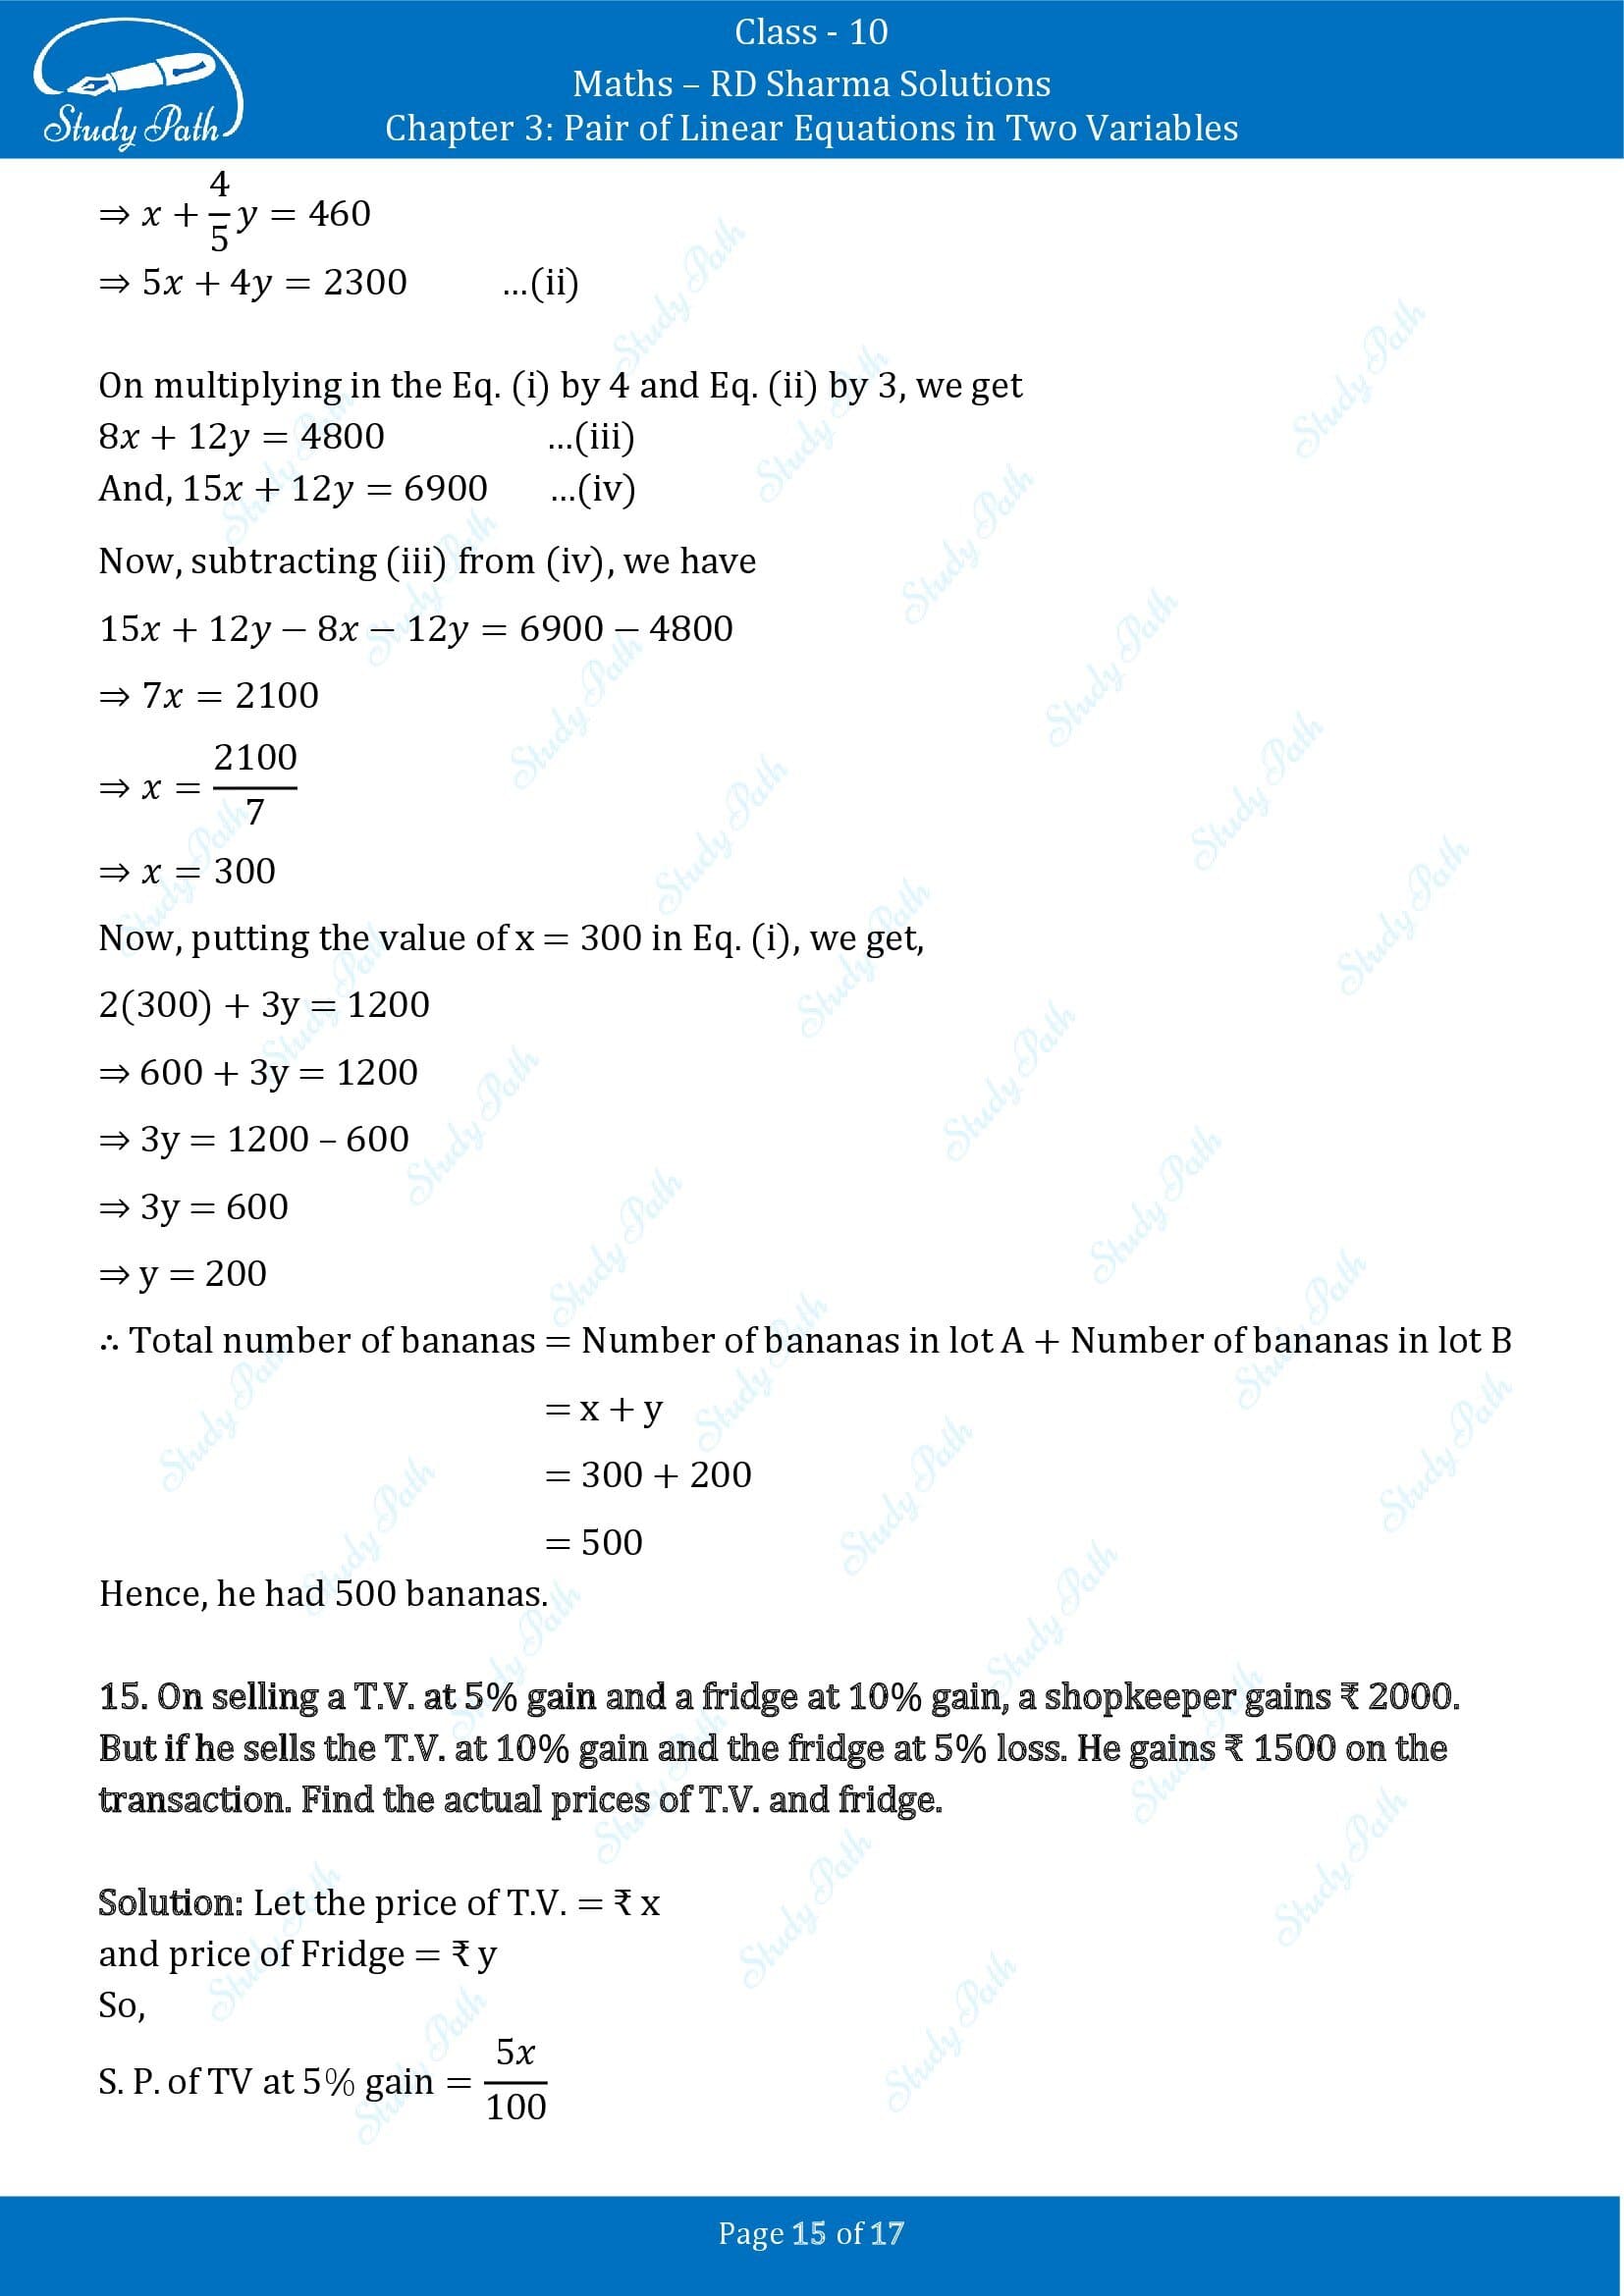 RD Sharma Solutions Class 10 Chapter 3 Pair of Linear Equations in Two Variables Exercise 3.6 00015